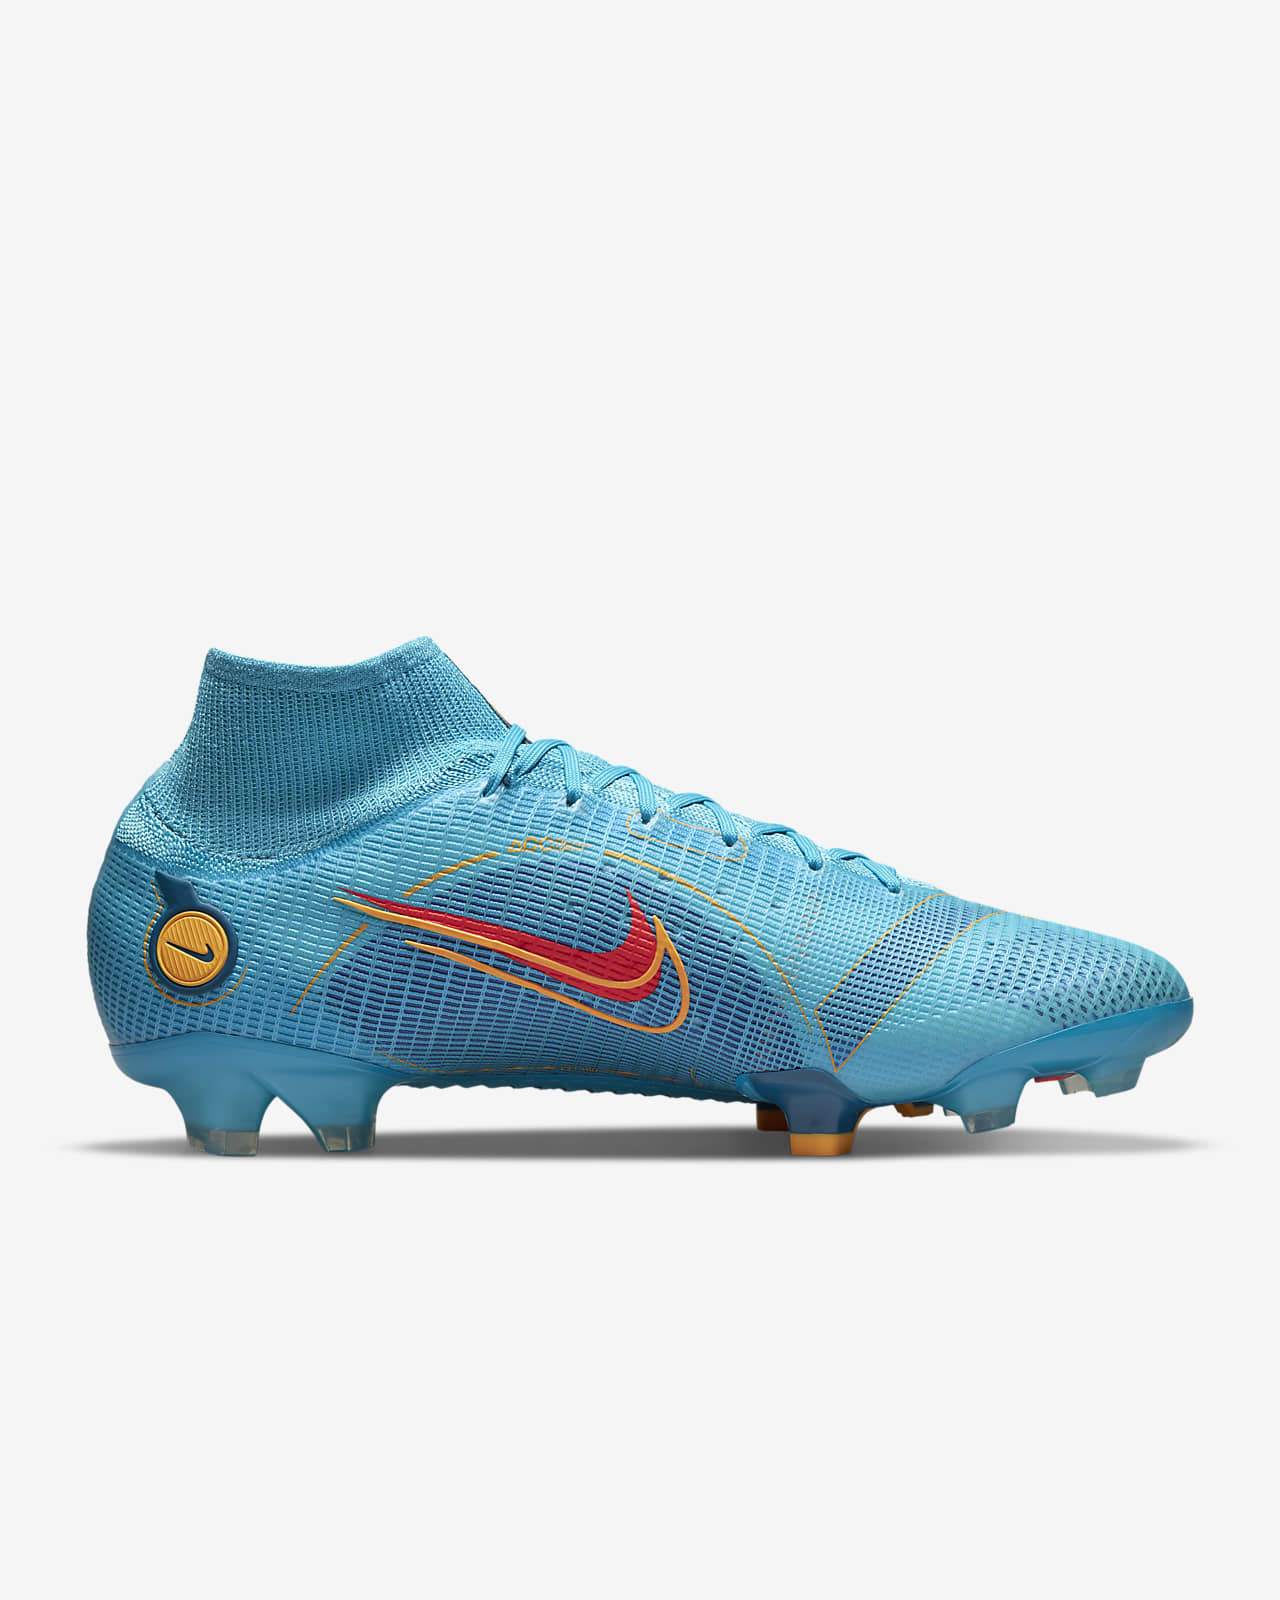 Nike Mercurial Superfly 8 Elite FG Firm-Ground Soccer Cleats. Nike.com